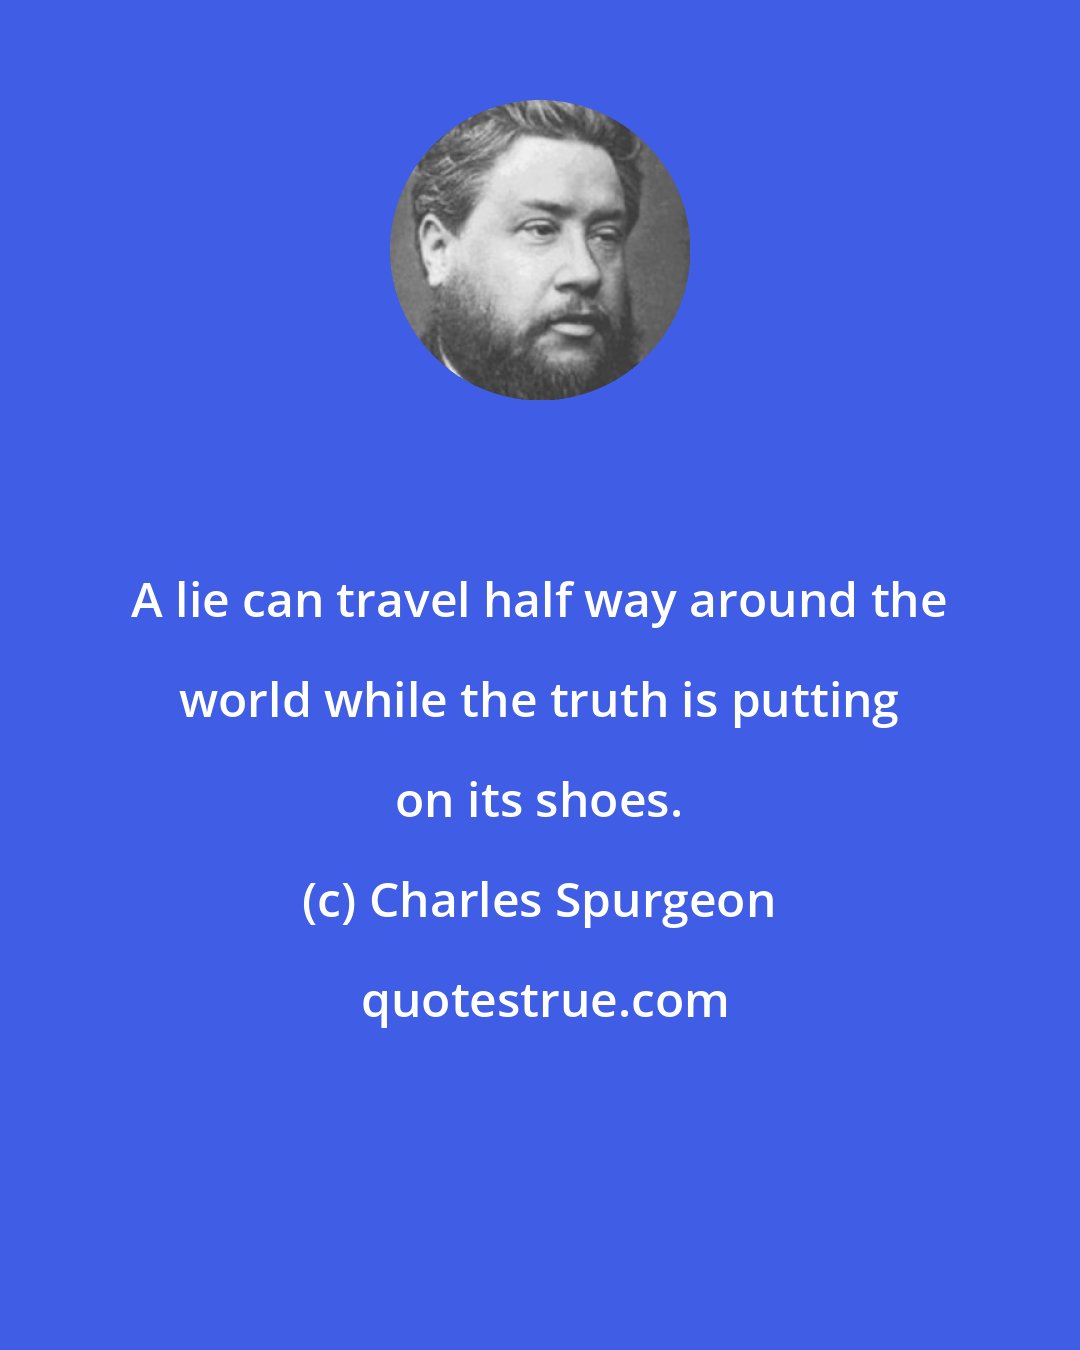 Charles Spurgeon: A lie can travel half way around the world while the truth is putting on its shoes.